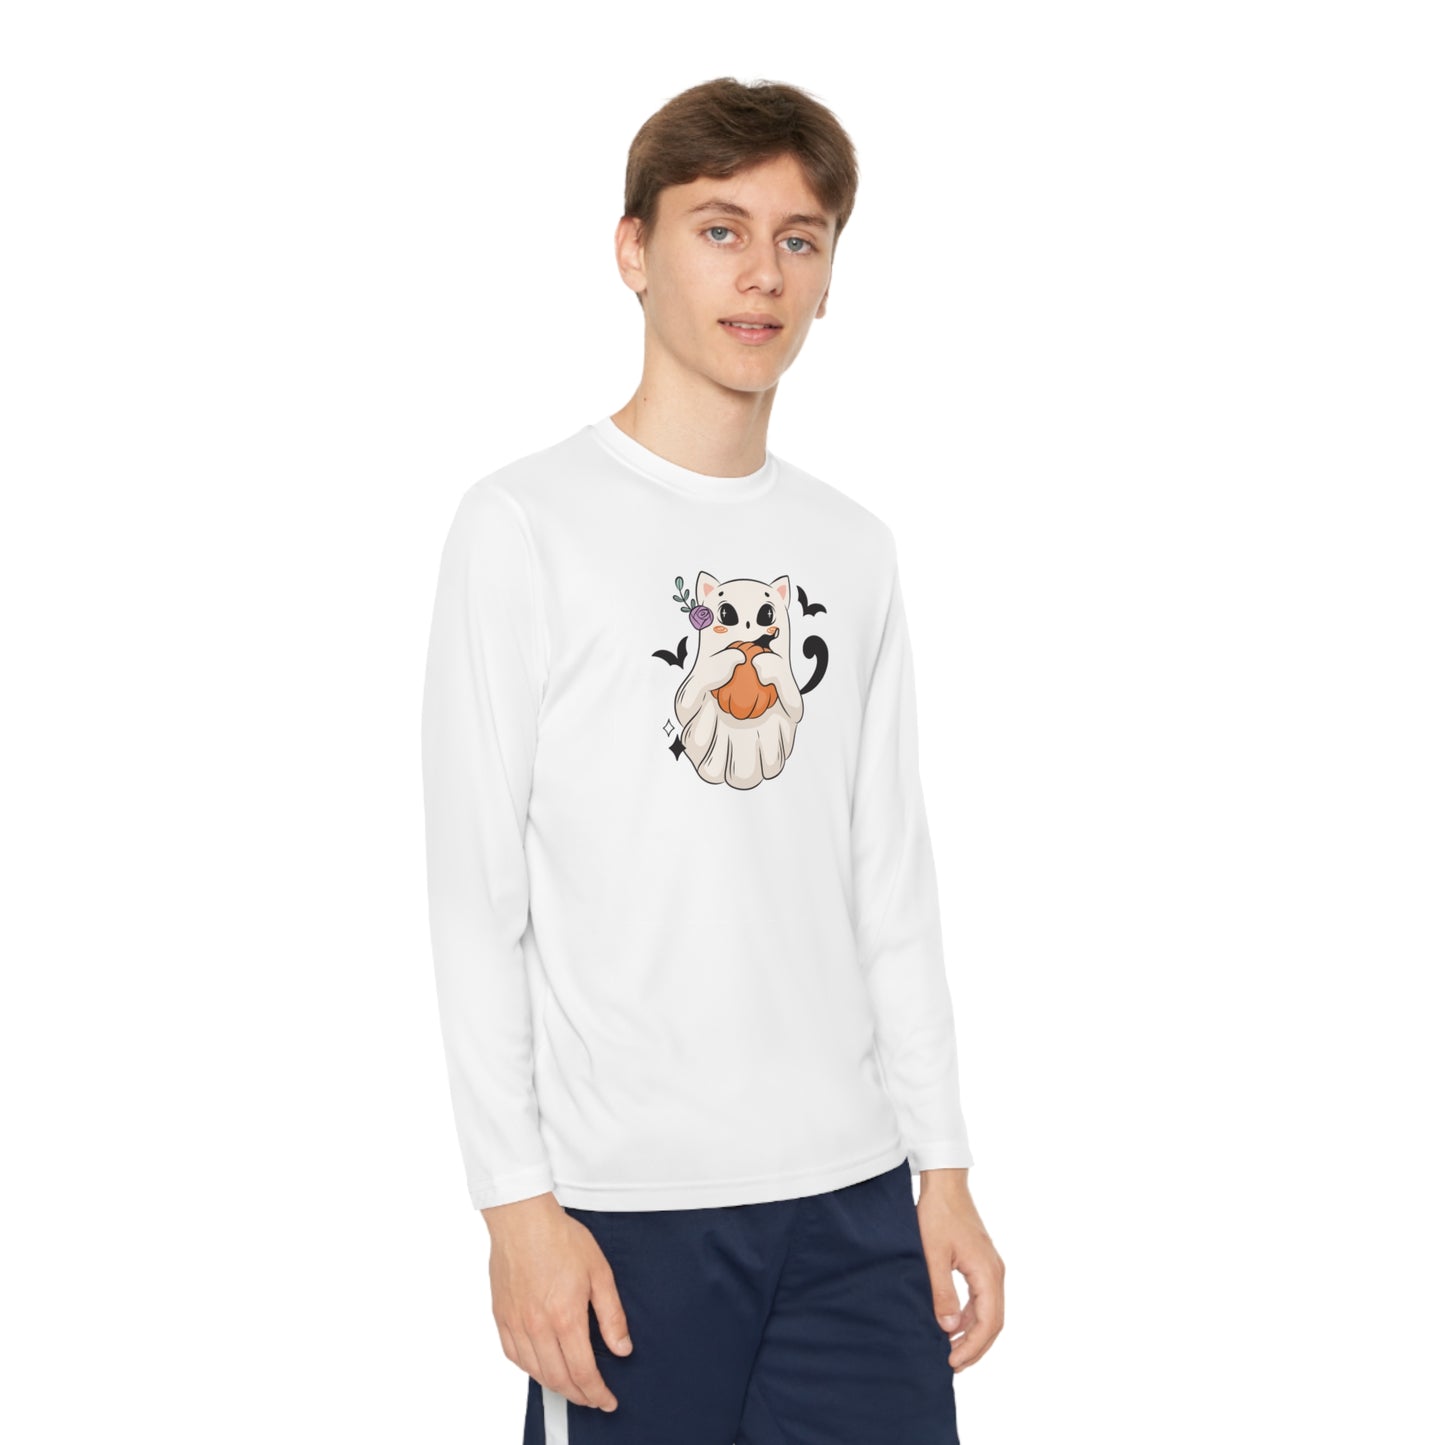 Sweet Kitty Ghost Youth Long Sleeve Competitor Tee - Kids clothes - Epileptic Al’s Shop